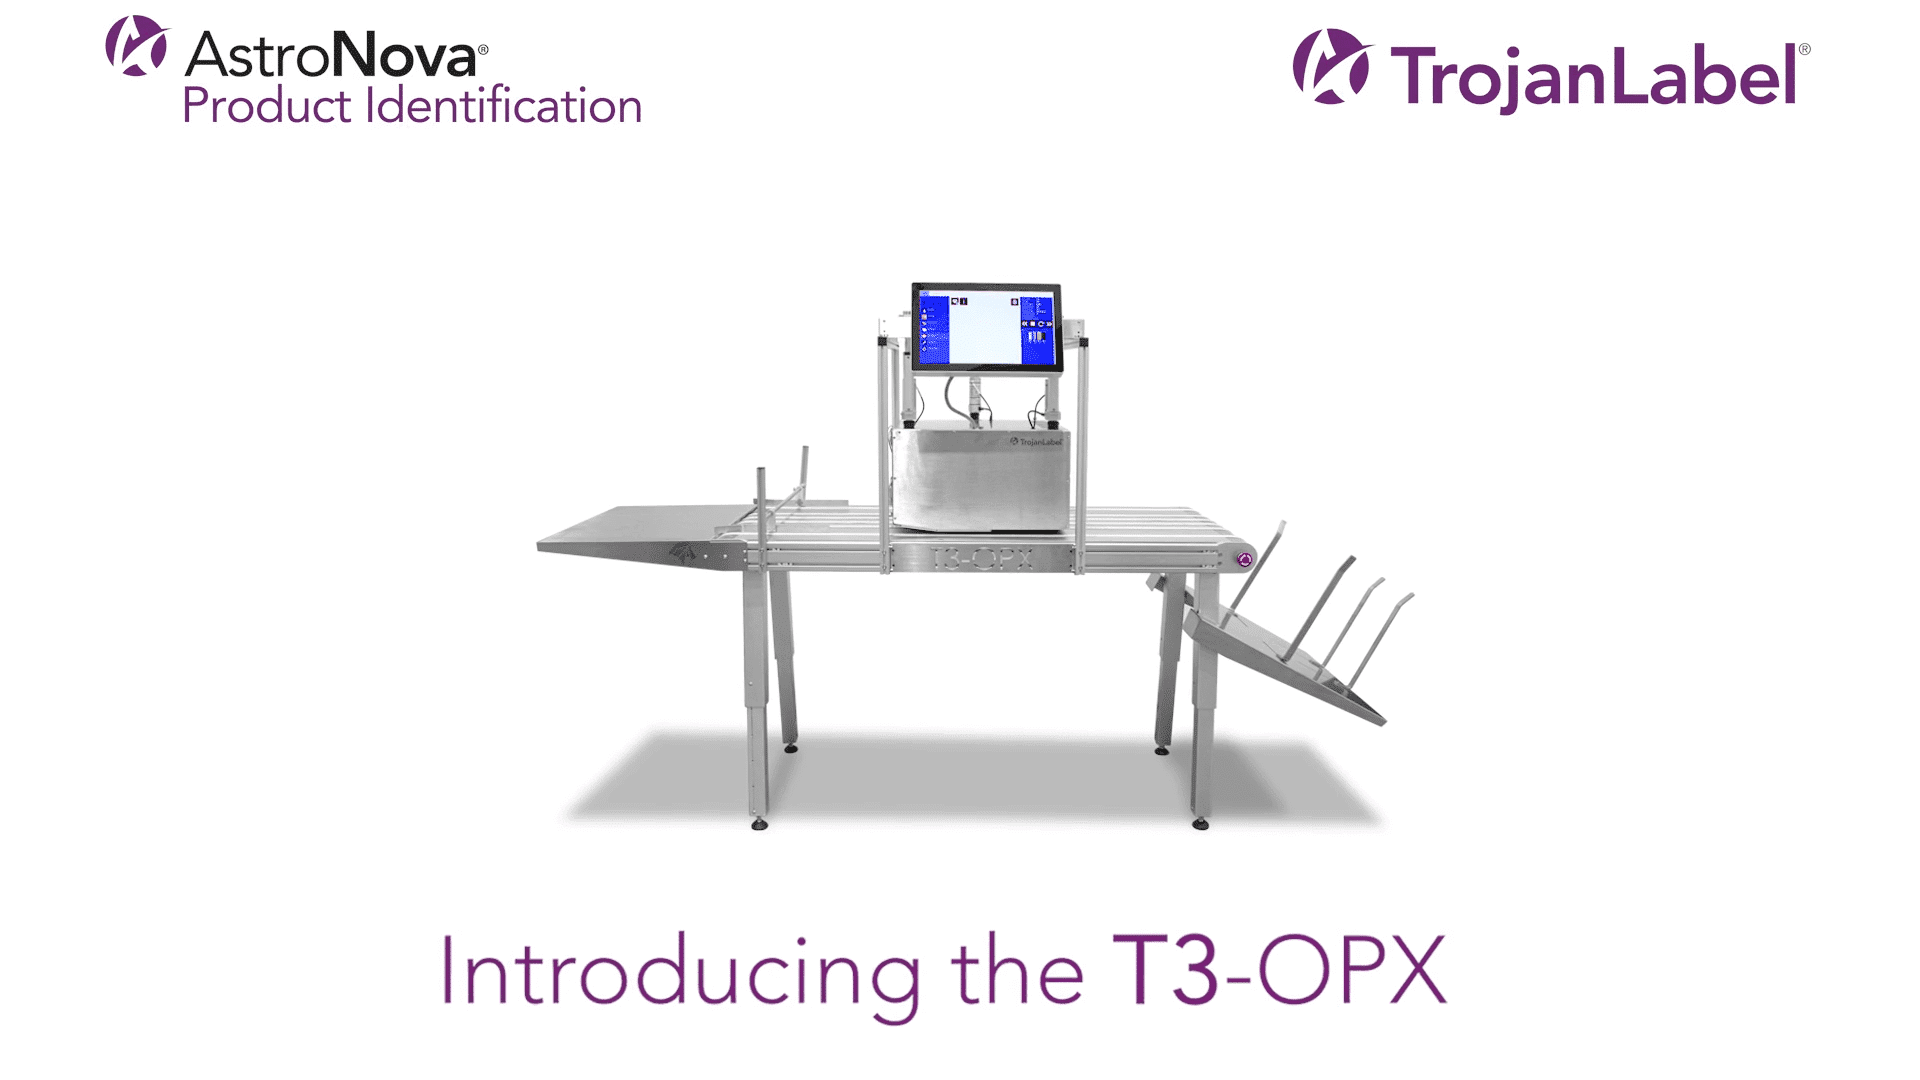 Introducing the T3-OPX